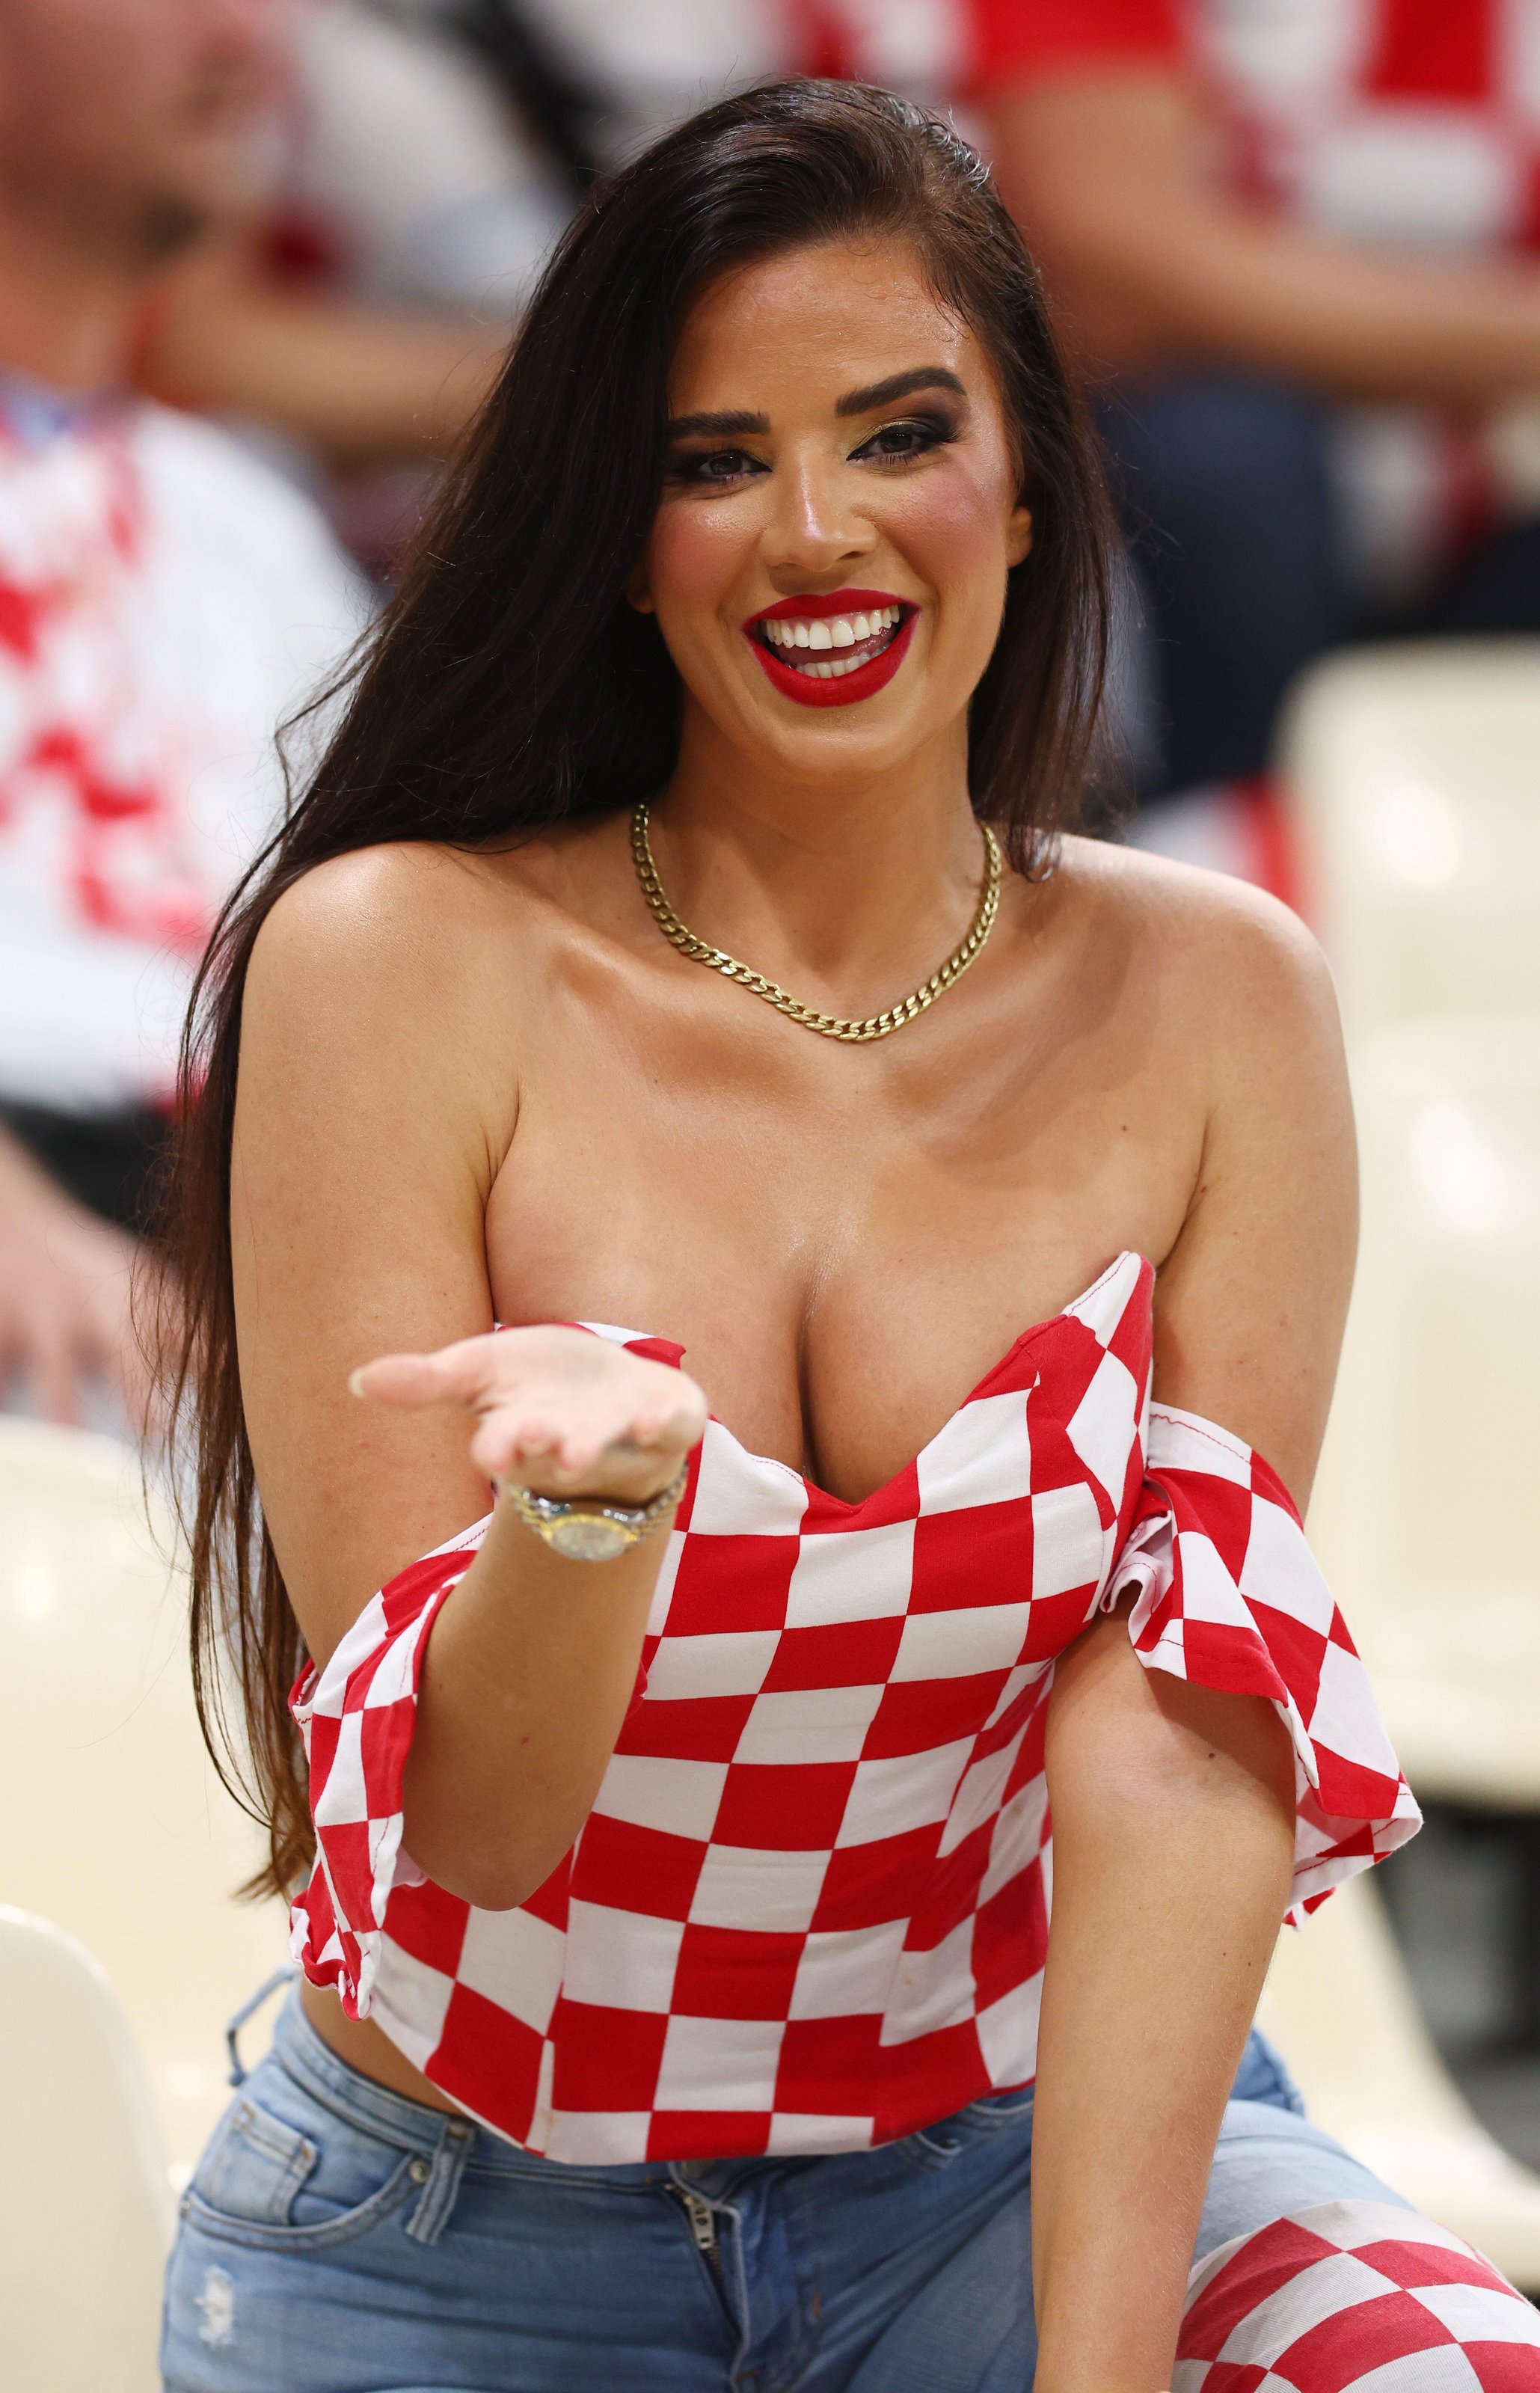 The Croatian model was snapped across stadiums in Qatar